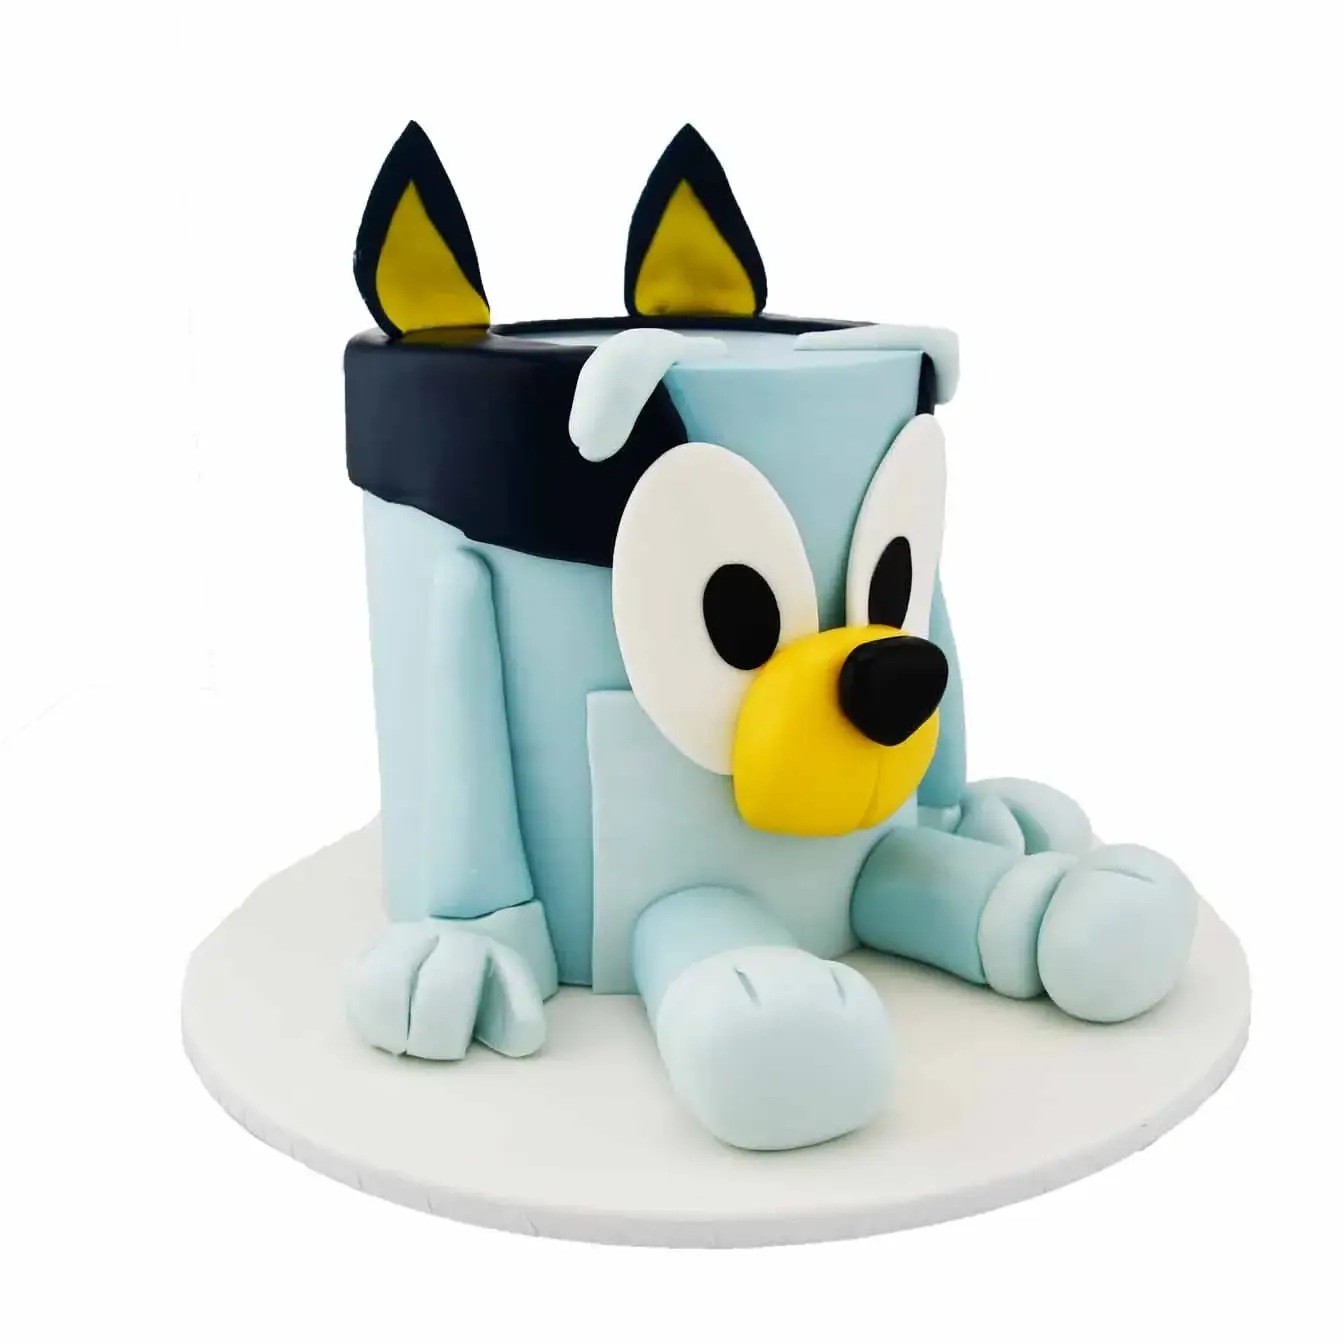 3D Bluey cake with intricate details, featuring Bluey's signature blue fur and facial features. Perfect centerpiece for a Bluey-themed party